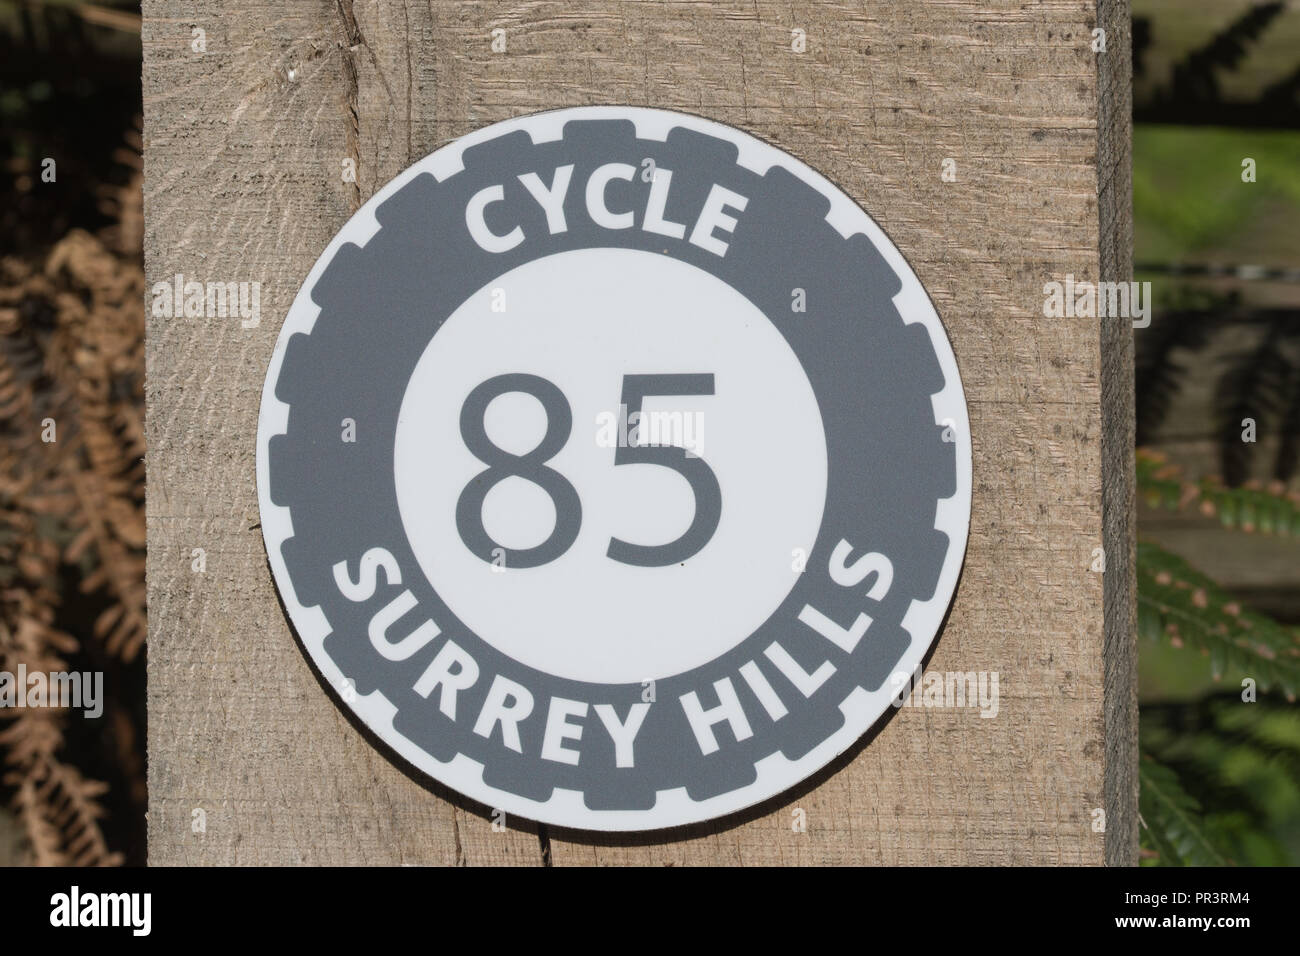 Post marker for the Cycle Surrey Hills Area of Outstanding Natural Beauty cycling trail or route (marker number 85) at Hankley Common, Surrey, UK. Stock Photo